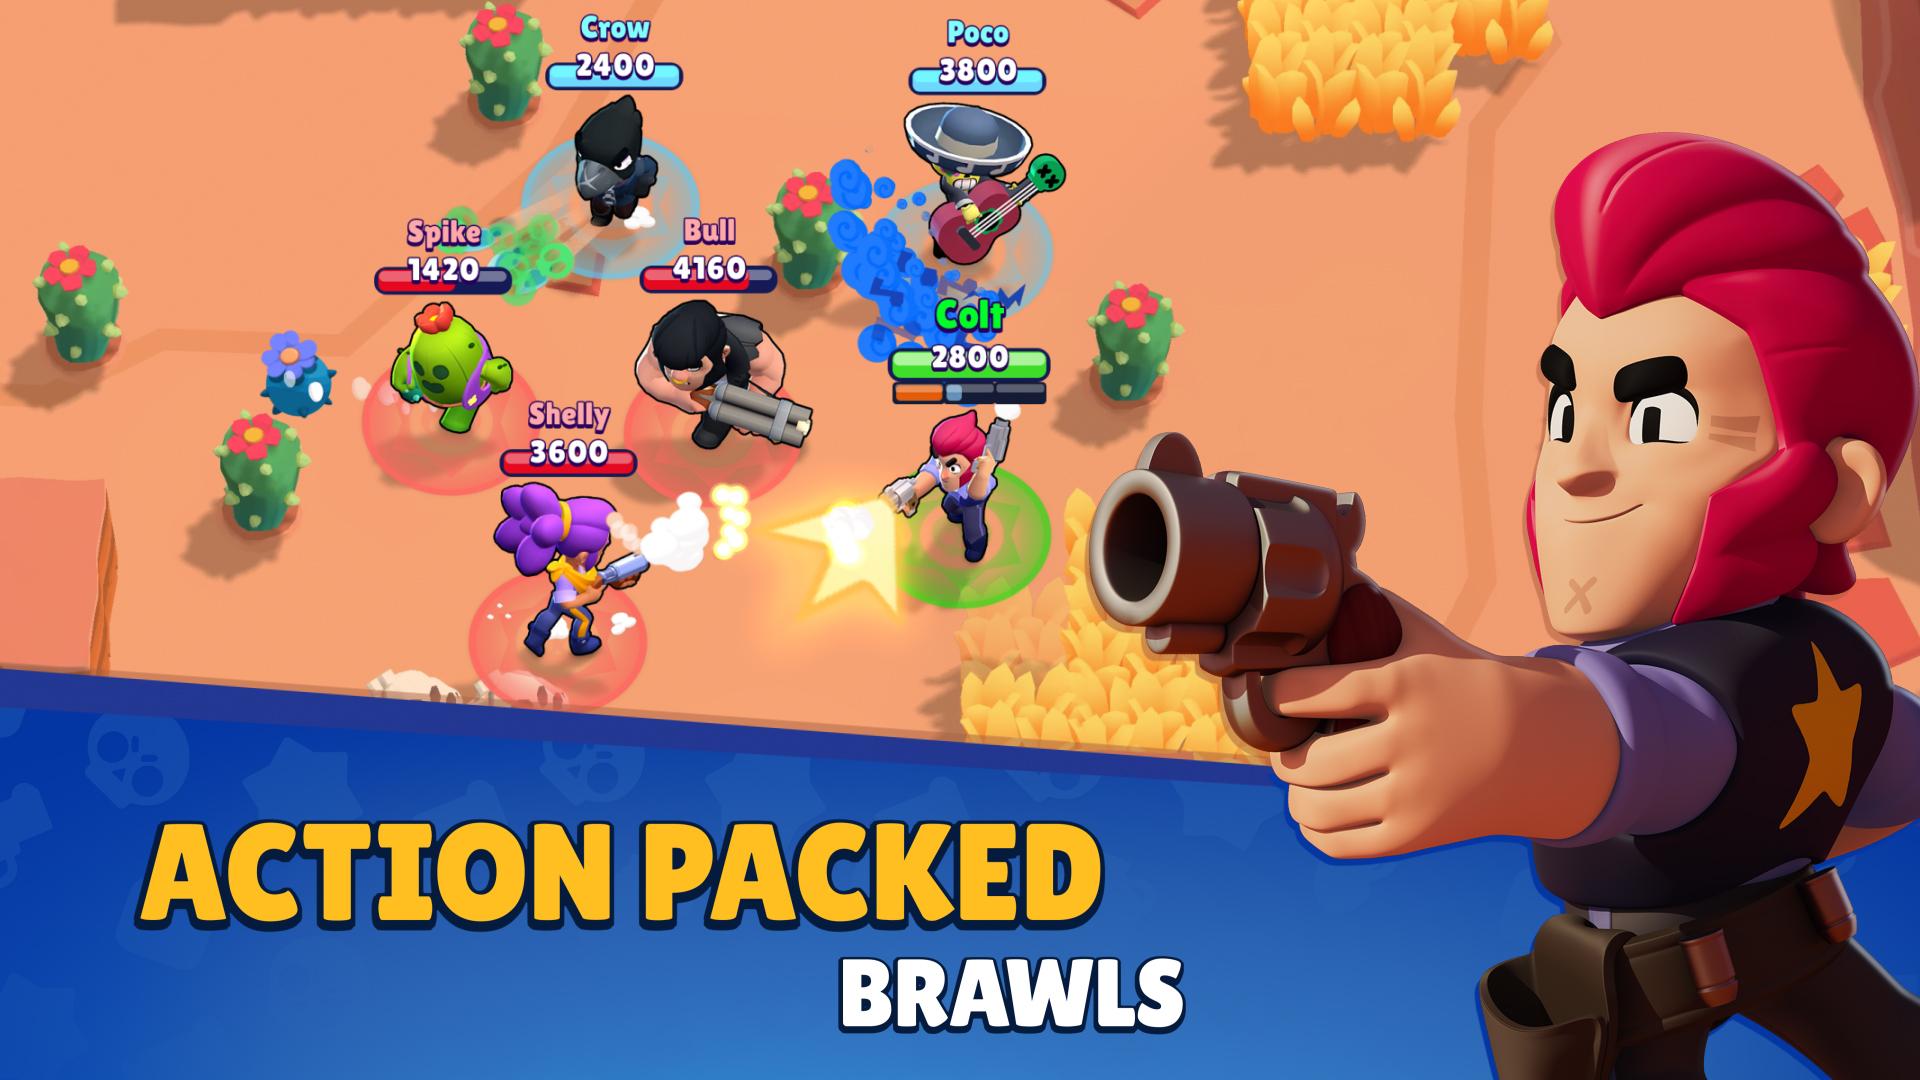 Brawl Stars How To Get The Most Bang For Your Gem Buck Premium Currency Guide Gameranx - brawl stars free box gold